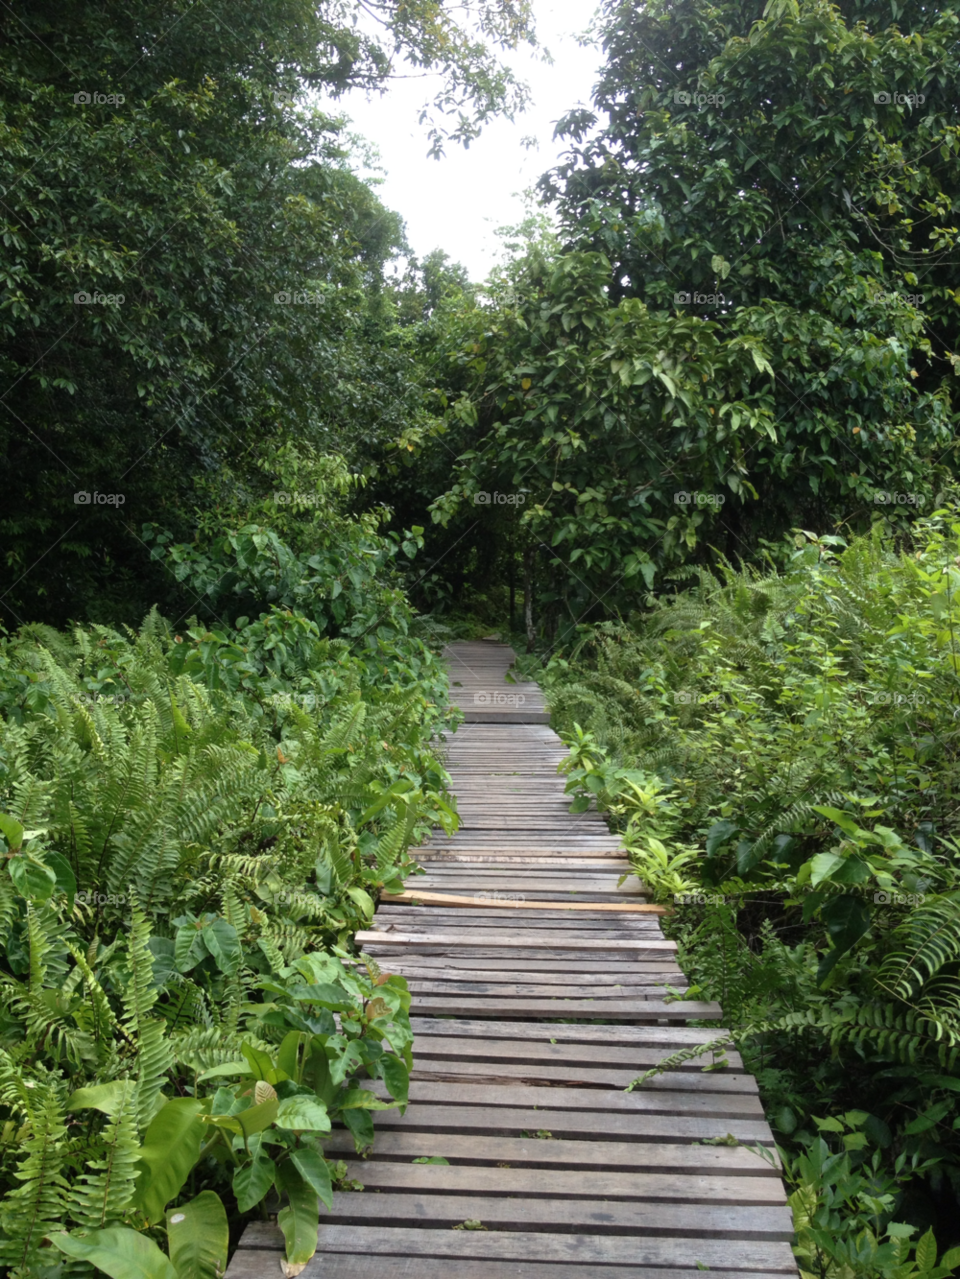 thailand jungle path wooden by Terry